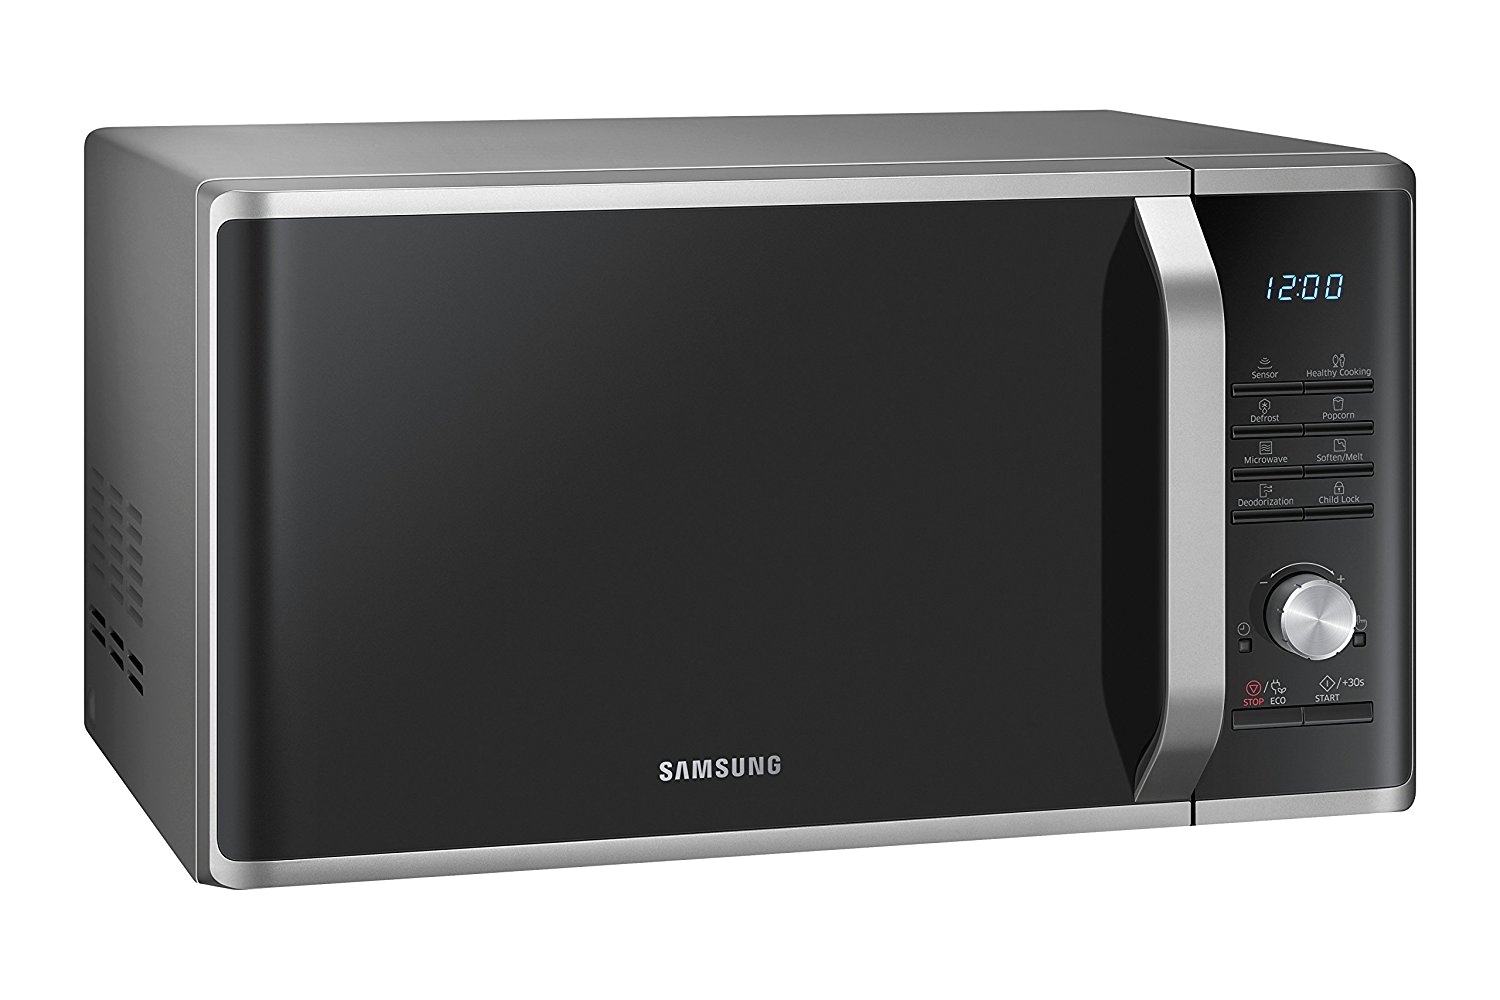 Stainless Steel Interior Microwave Ovens Amazon Com Samsung Ms11k3000as 1 1 Cu Ft Countertop Microwave